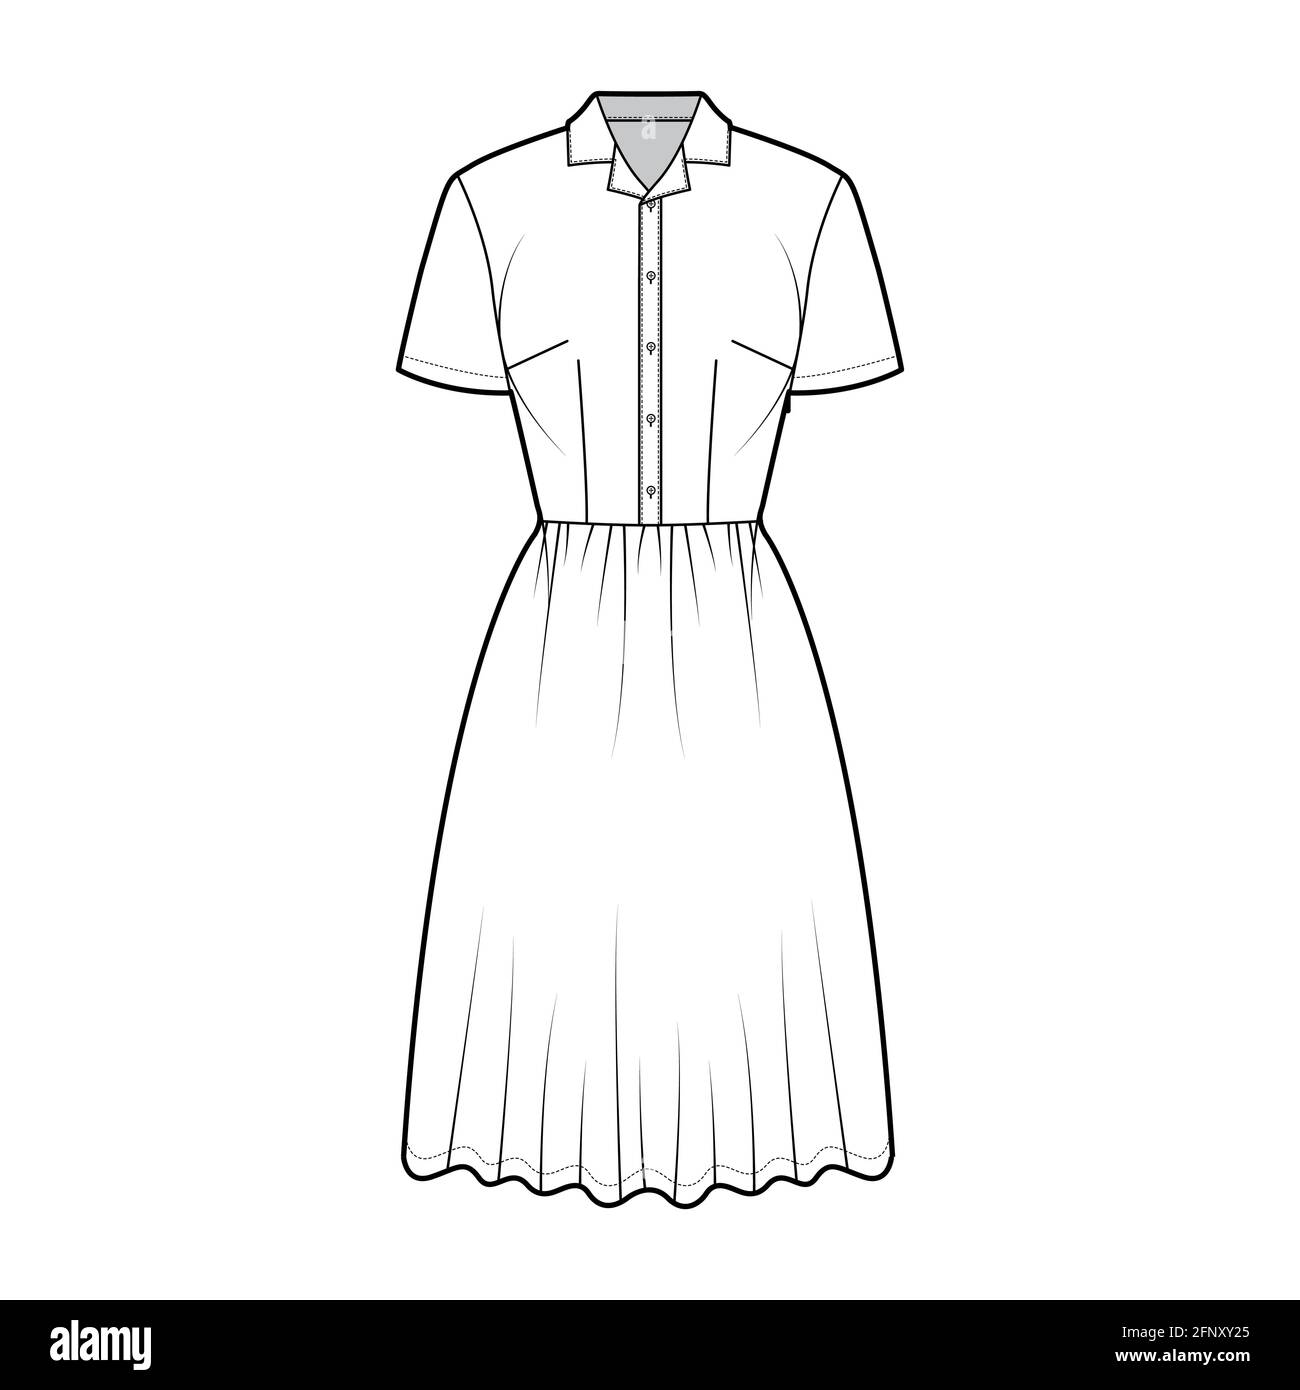 Dress house shirt technical fashion illustration with short sleeves, knee length full skirt, classic henley collar. Flat apparel front, white color style. Women, men unisex CAD mockup Stock Vector